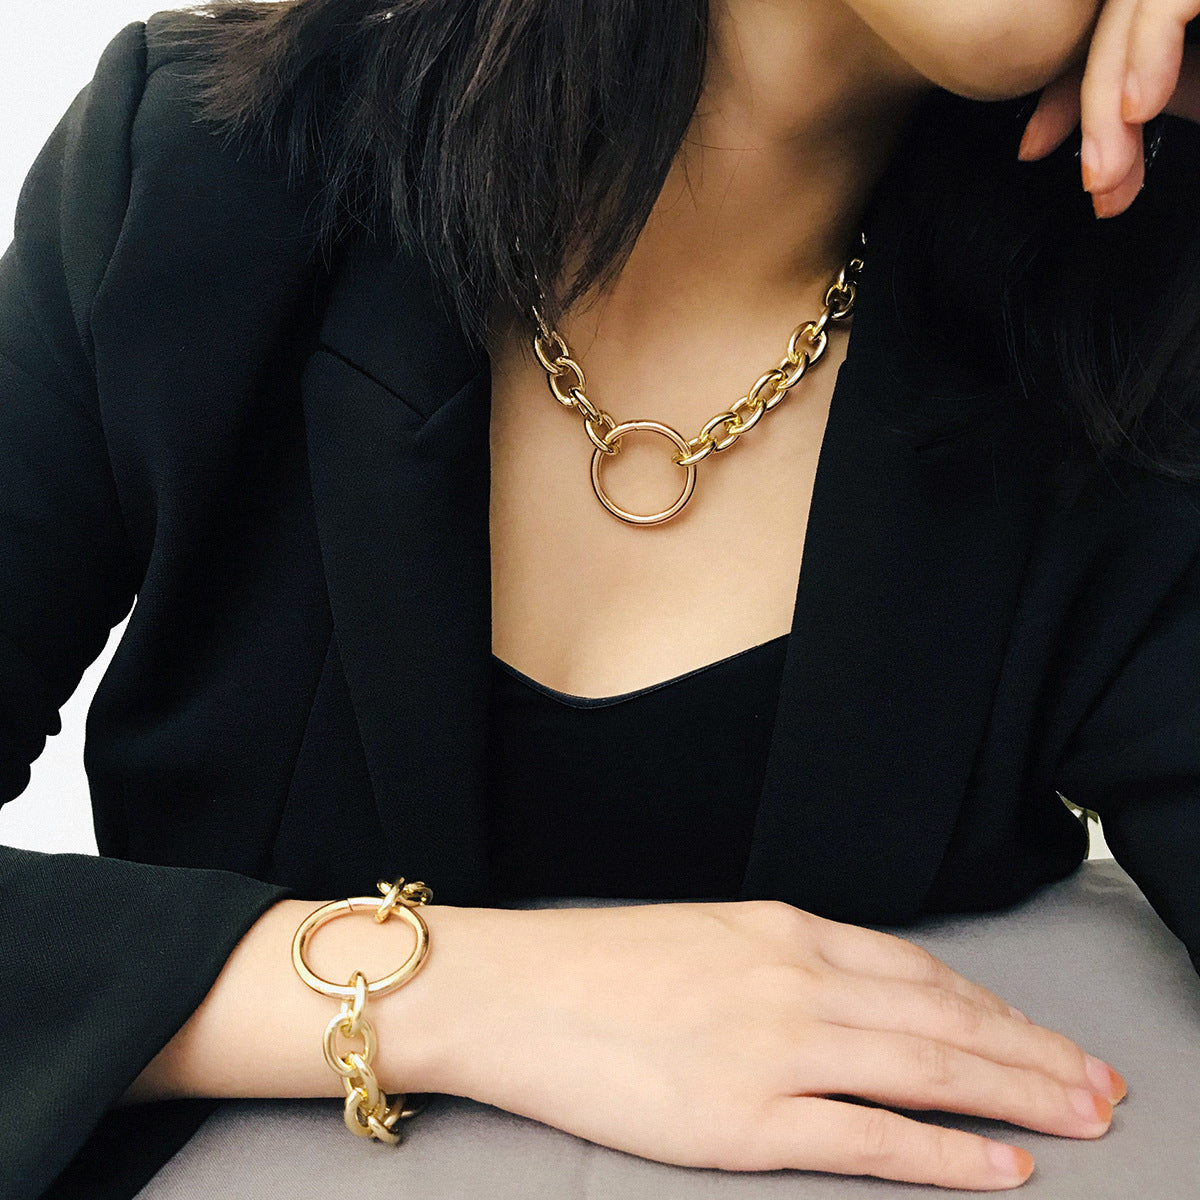 A woman wearing a black jacket and a Maramalive™ Personality Punk Exaggerated Metal Necklace Necklace Simple Geometric Circle Retro Necklace Bracelet Set bracelet.